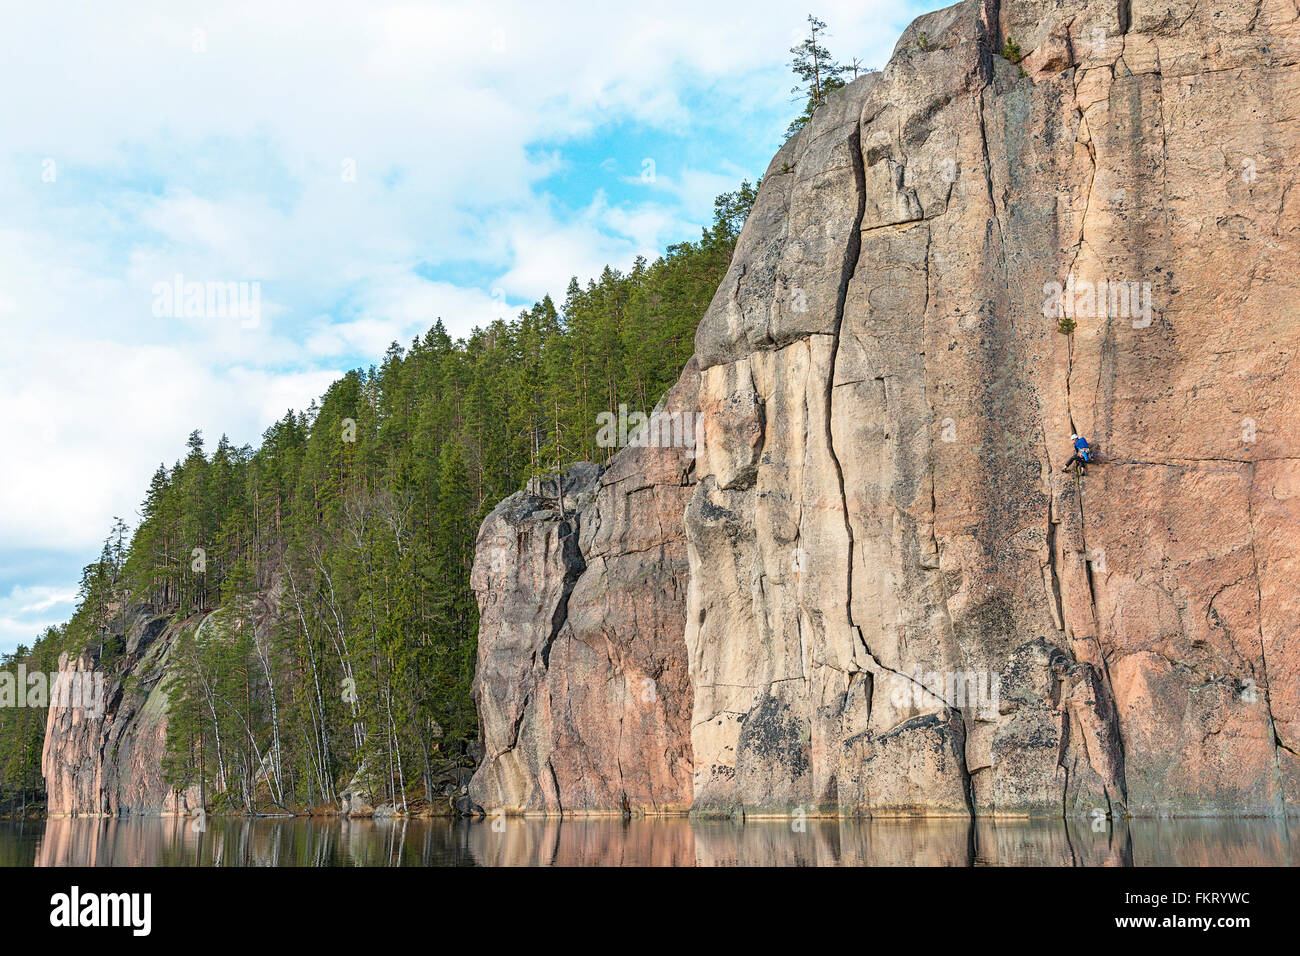 Rock climbers at Olhava cliff. Repovesi National Park, Finland. Stock Photo